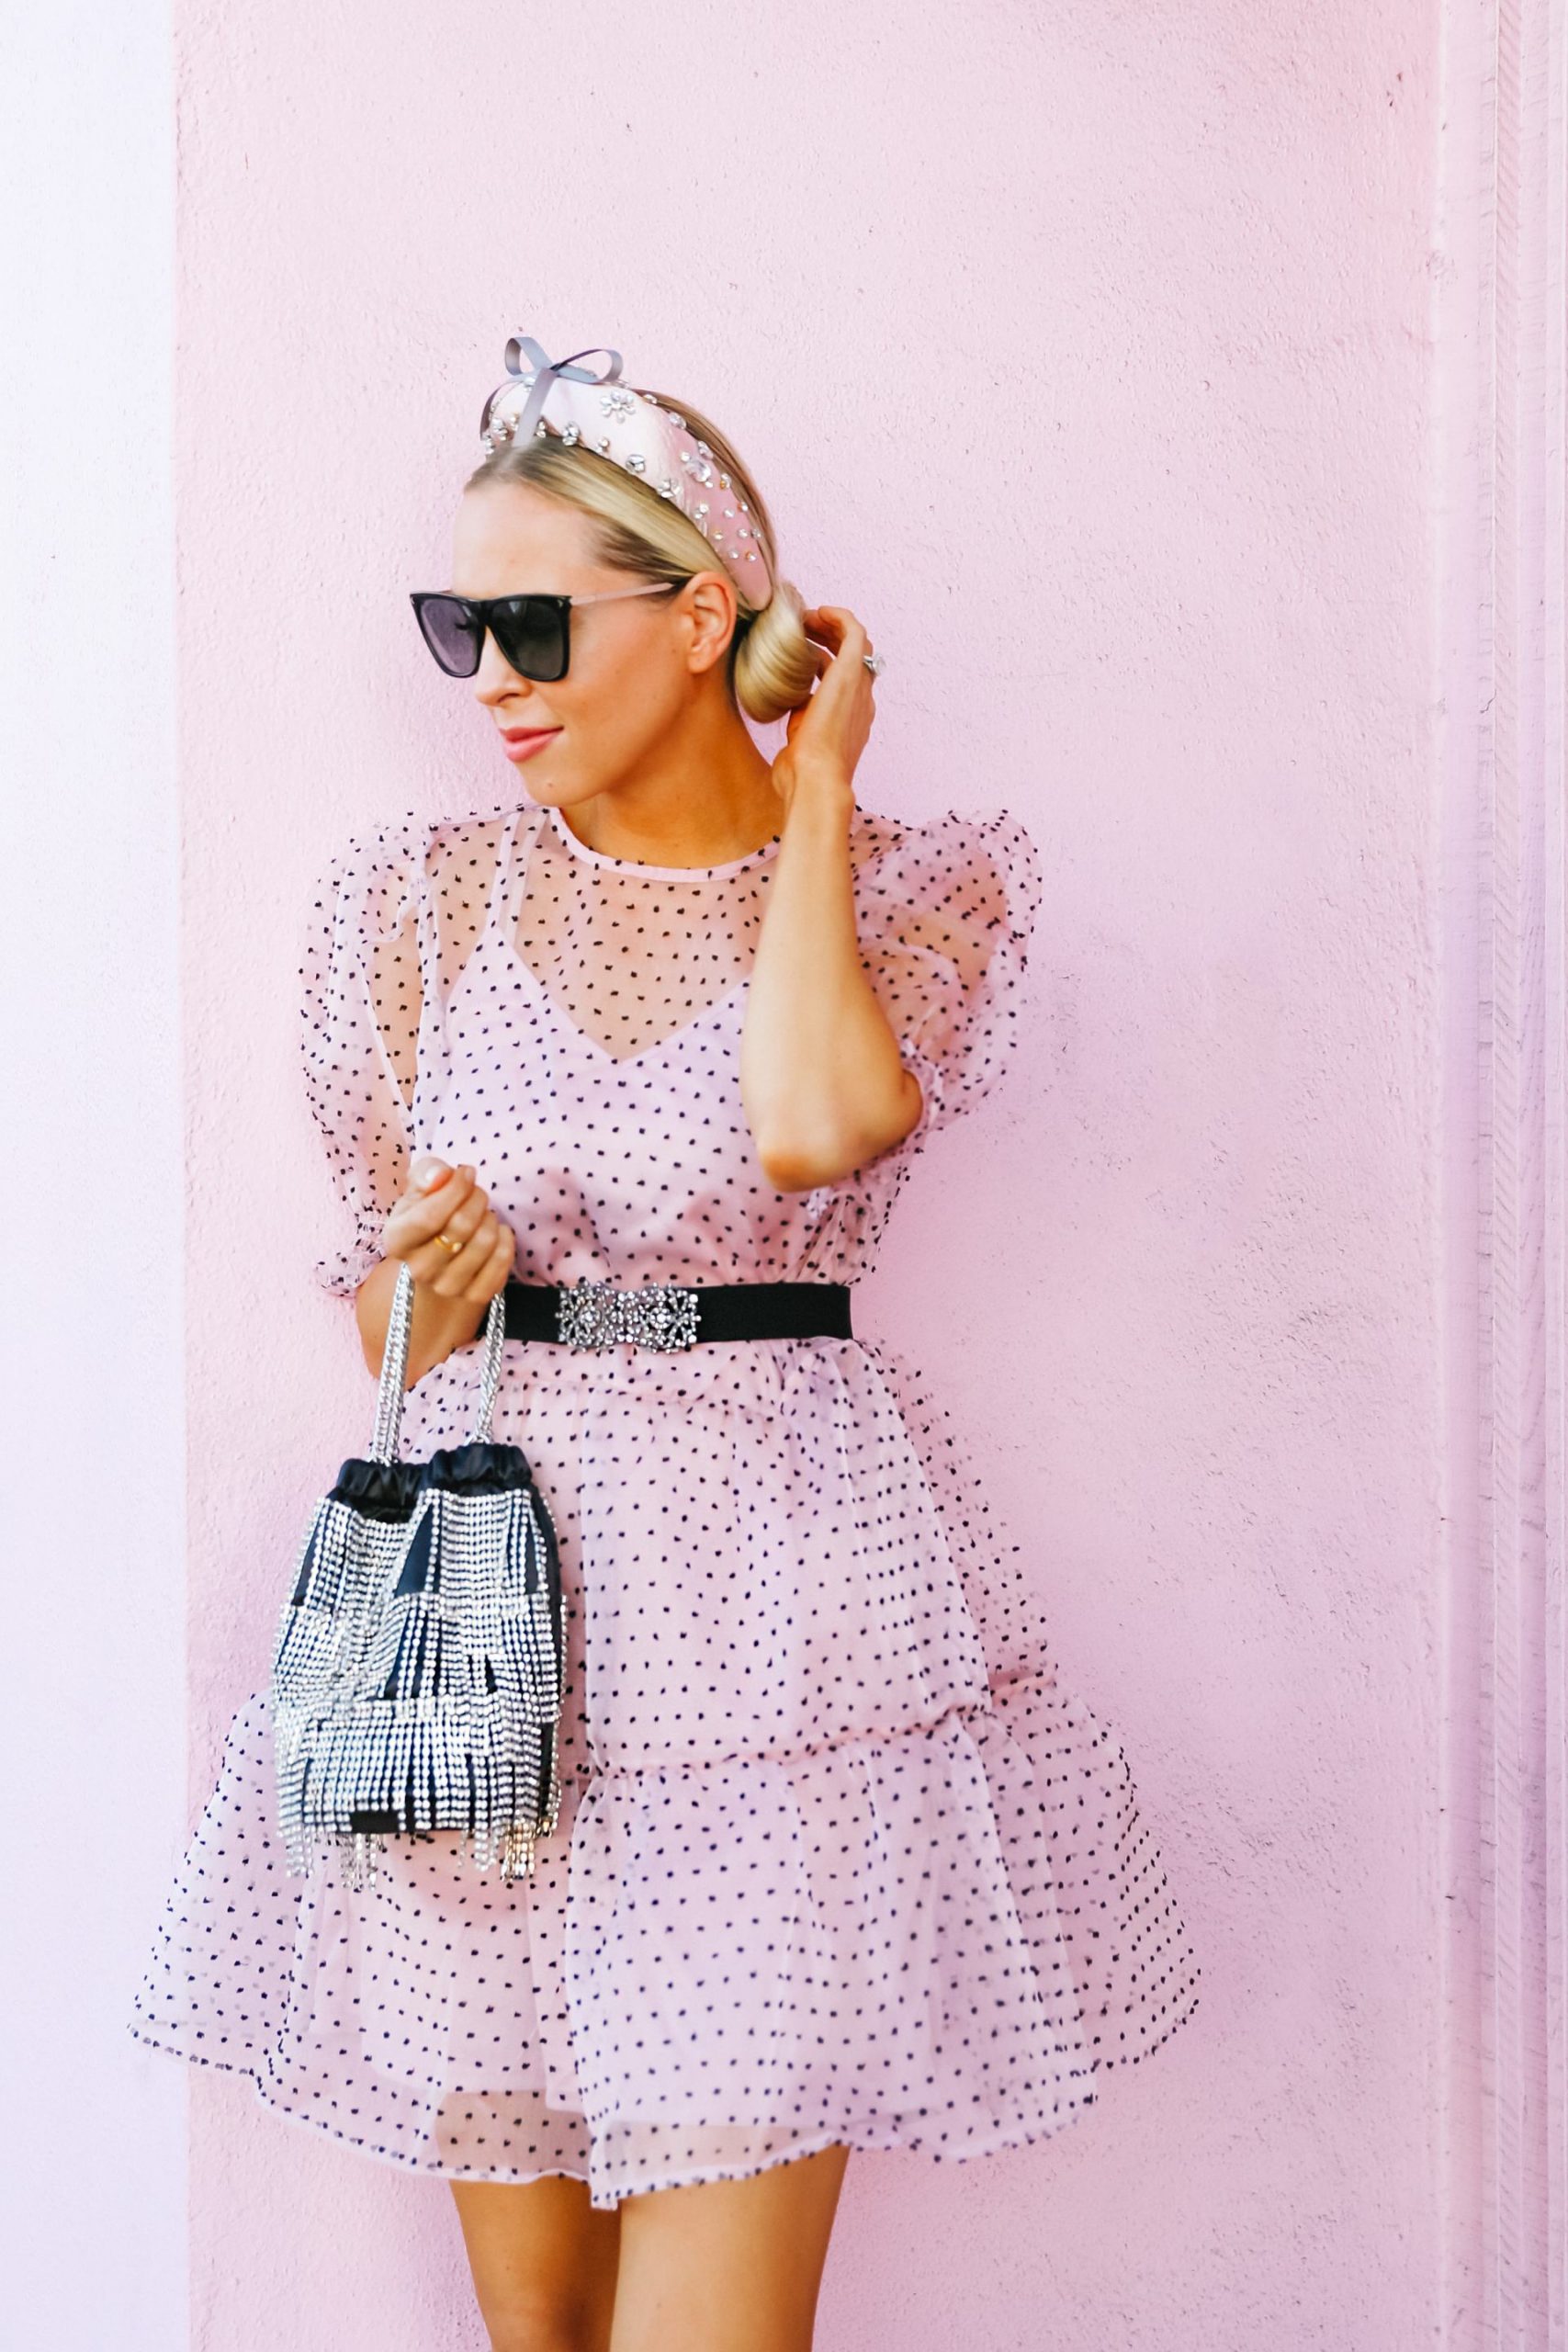 H&M short puff-sleeved dress and summer dresses under $100 you will love, featured by top San Francisco blogger Lombard and Fifth.